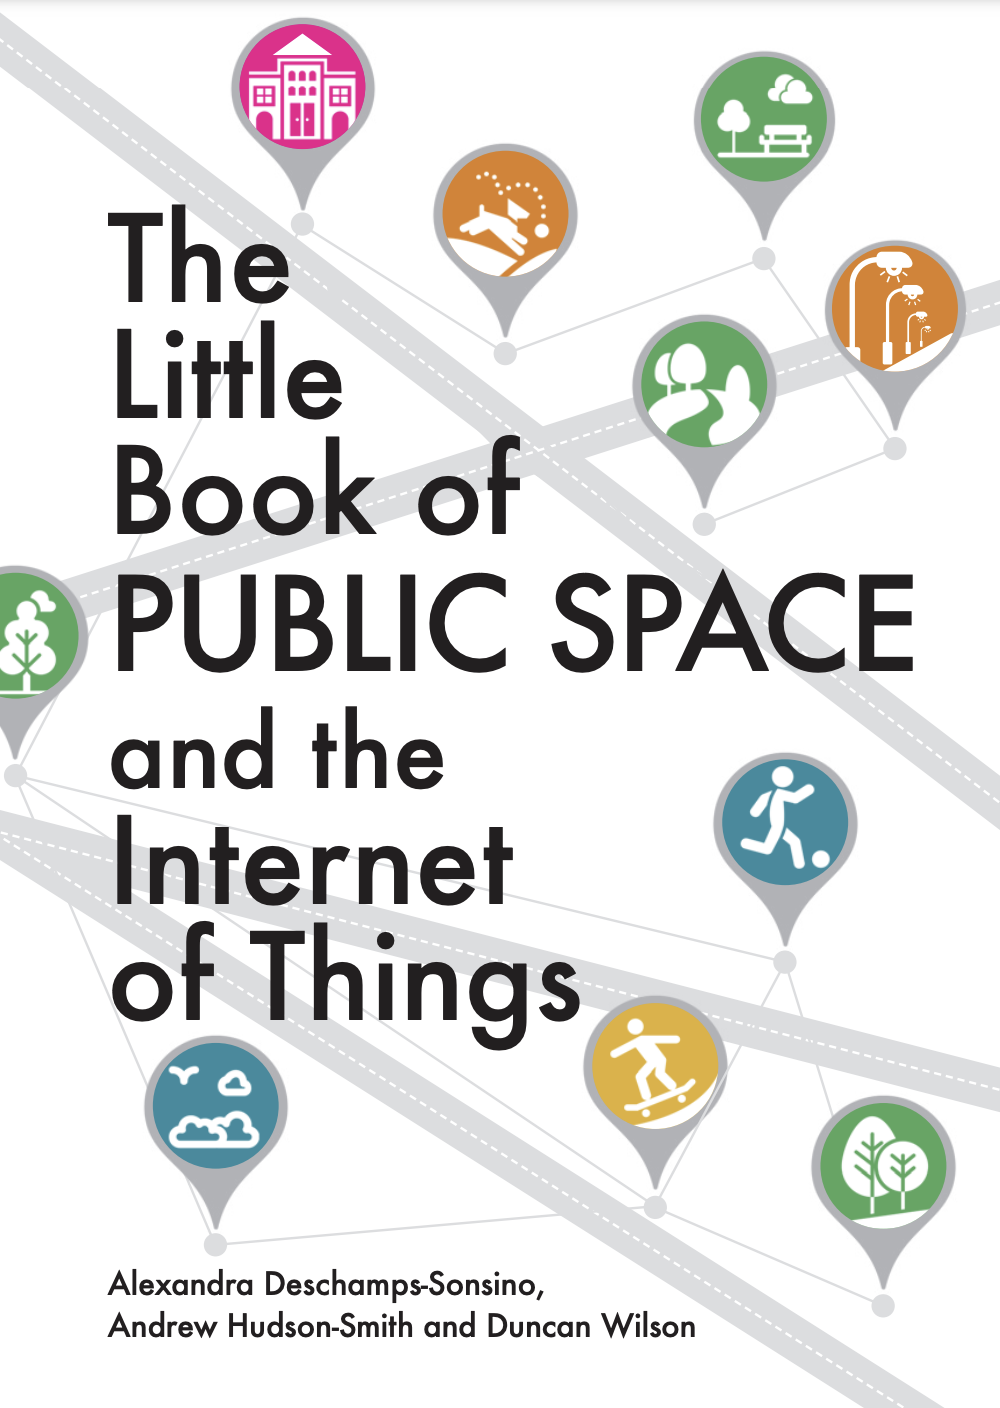 The Little Book of Public Spaces and the Internet of Things